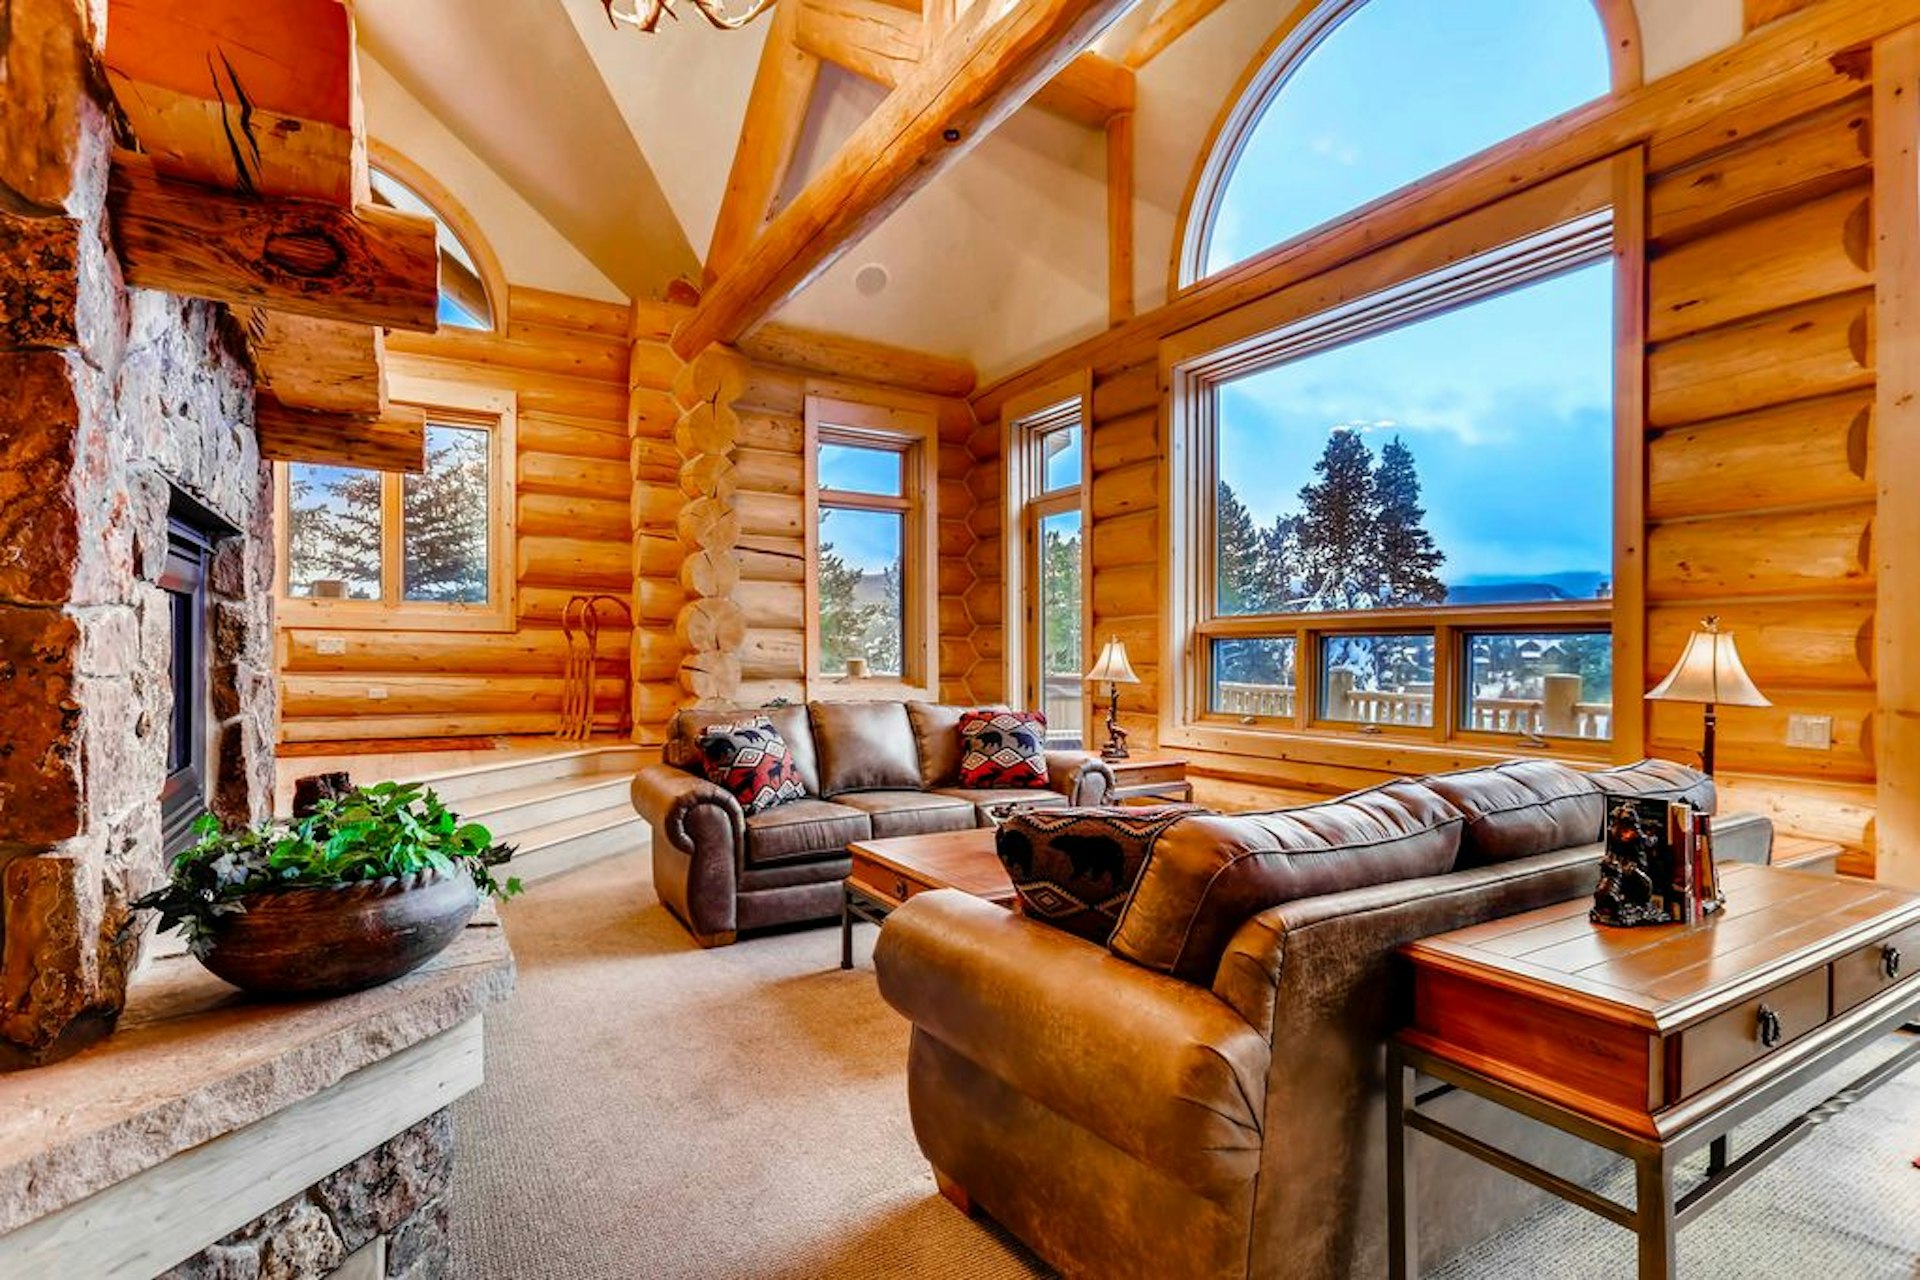 The living space at Clifton Lodge, with log walls, a stone fireplace, leather sofas, and big windows with mountain views